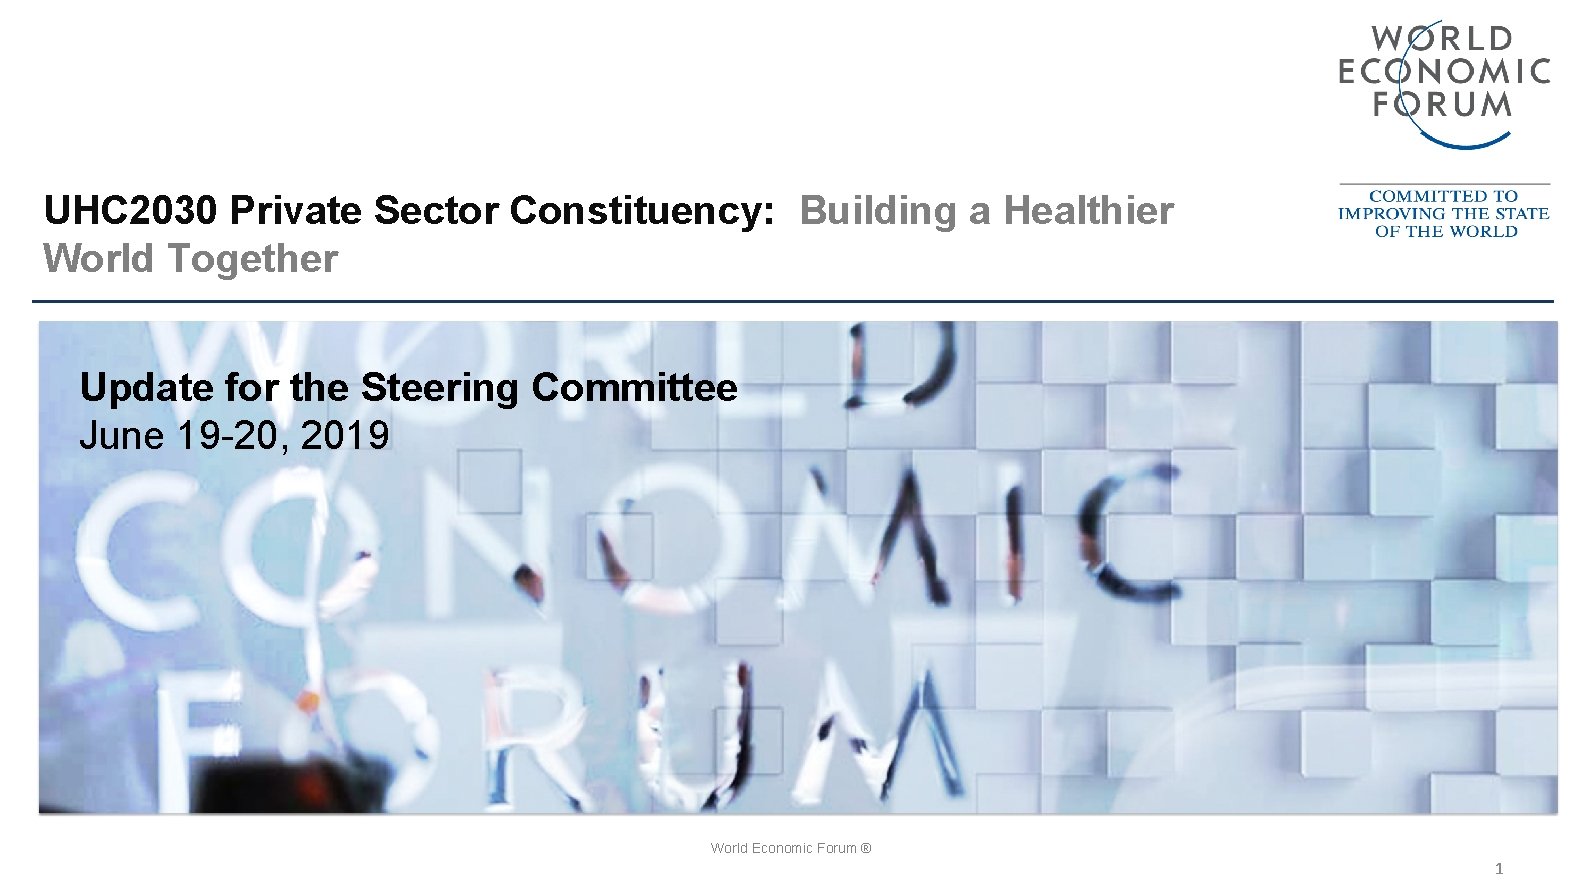 UHC 2030 Private Sector Constituency: Building a Healthier World Together Update for the Steering